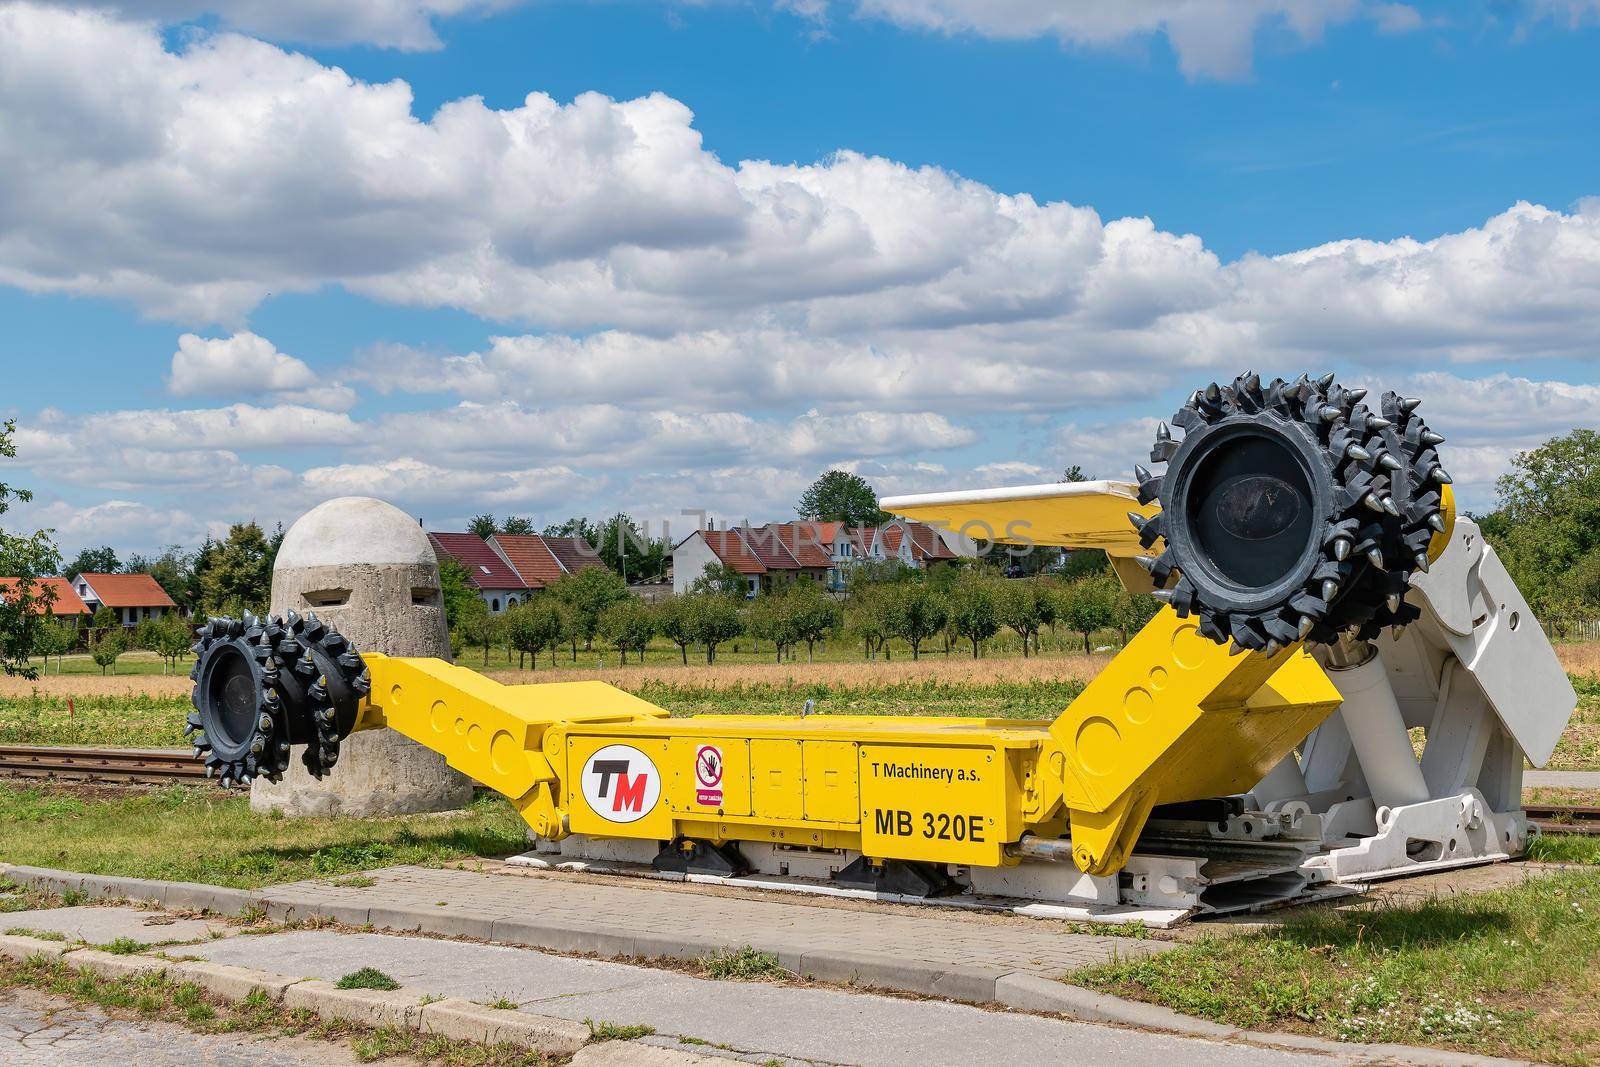 Exhibited mining combine harvester as a memorial near the village Ratiskovice by rostik924